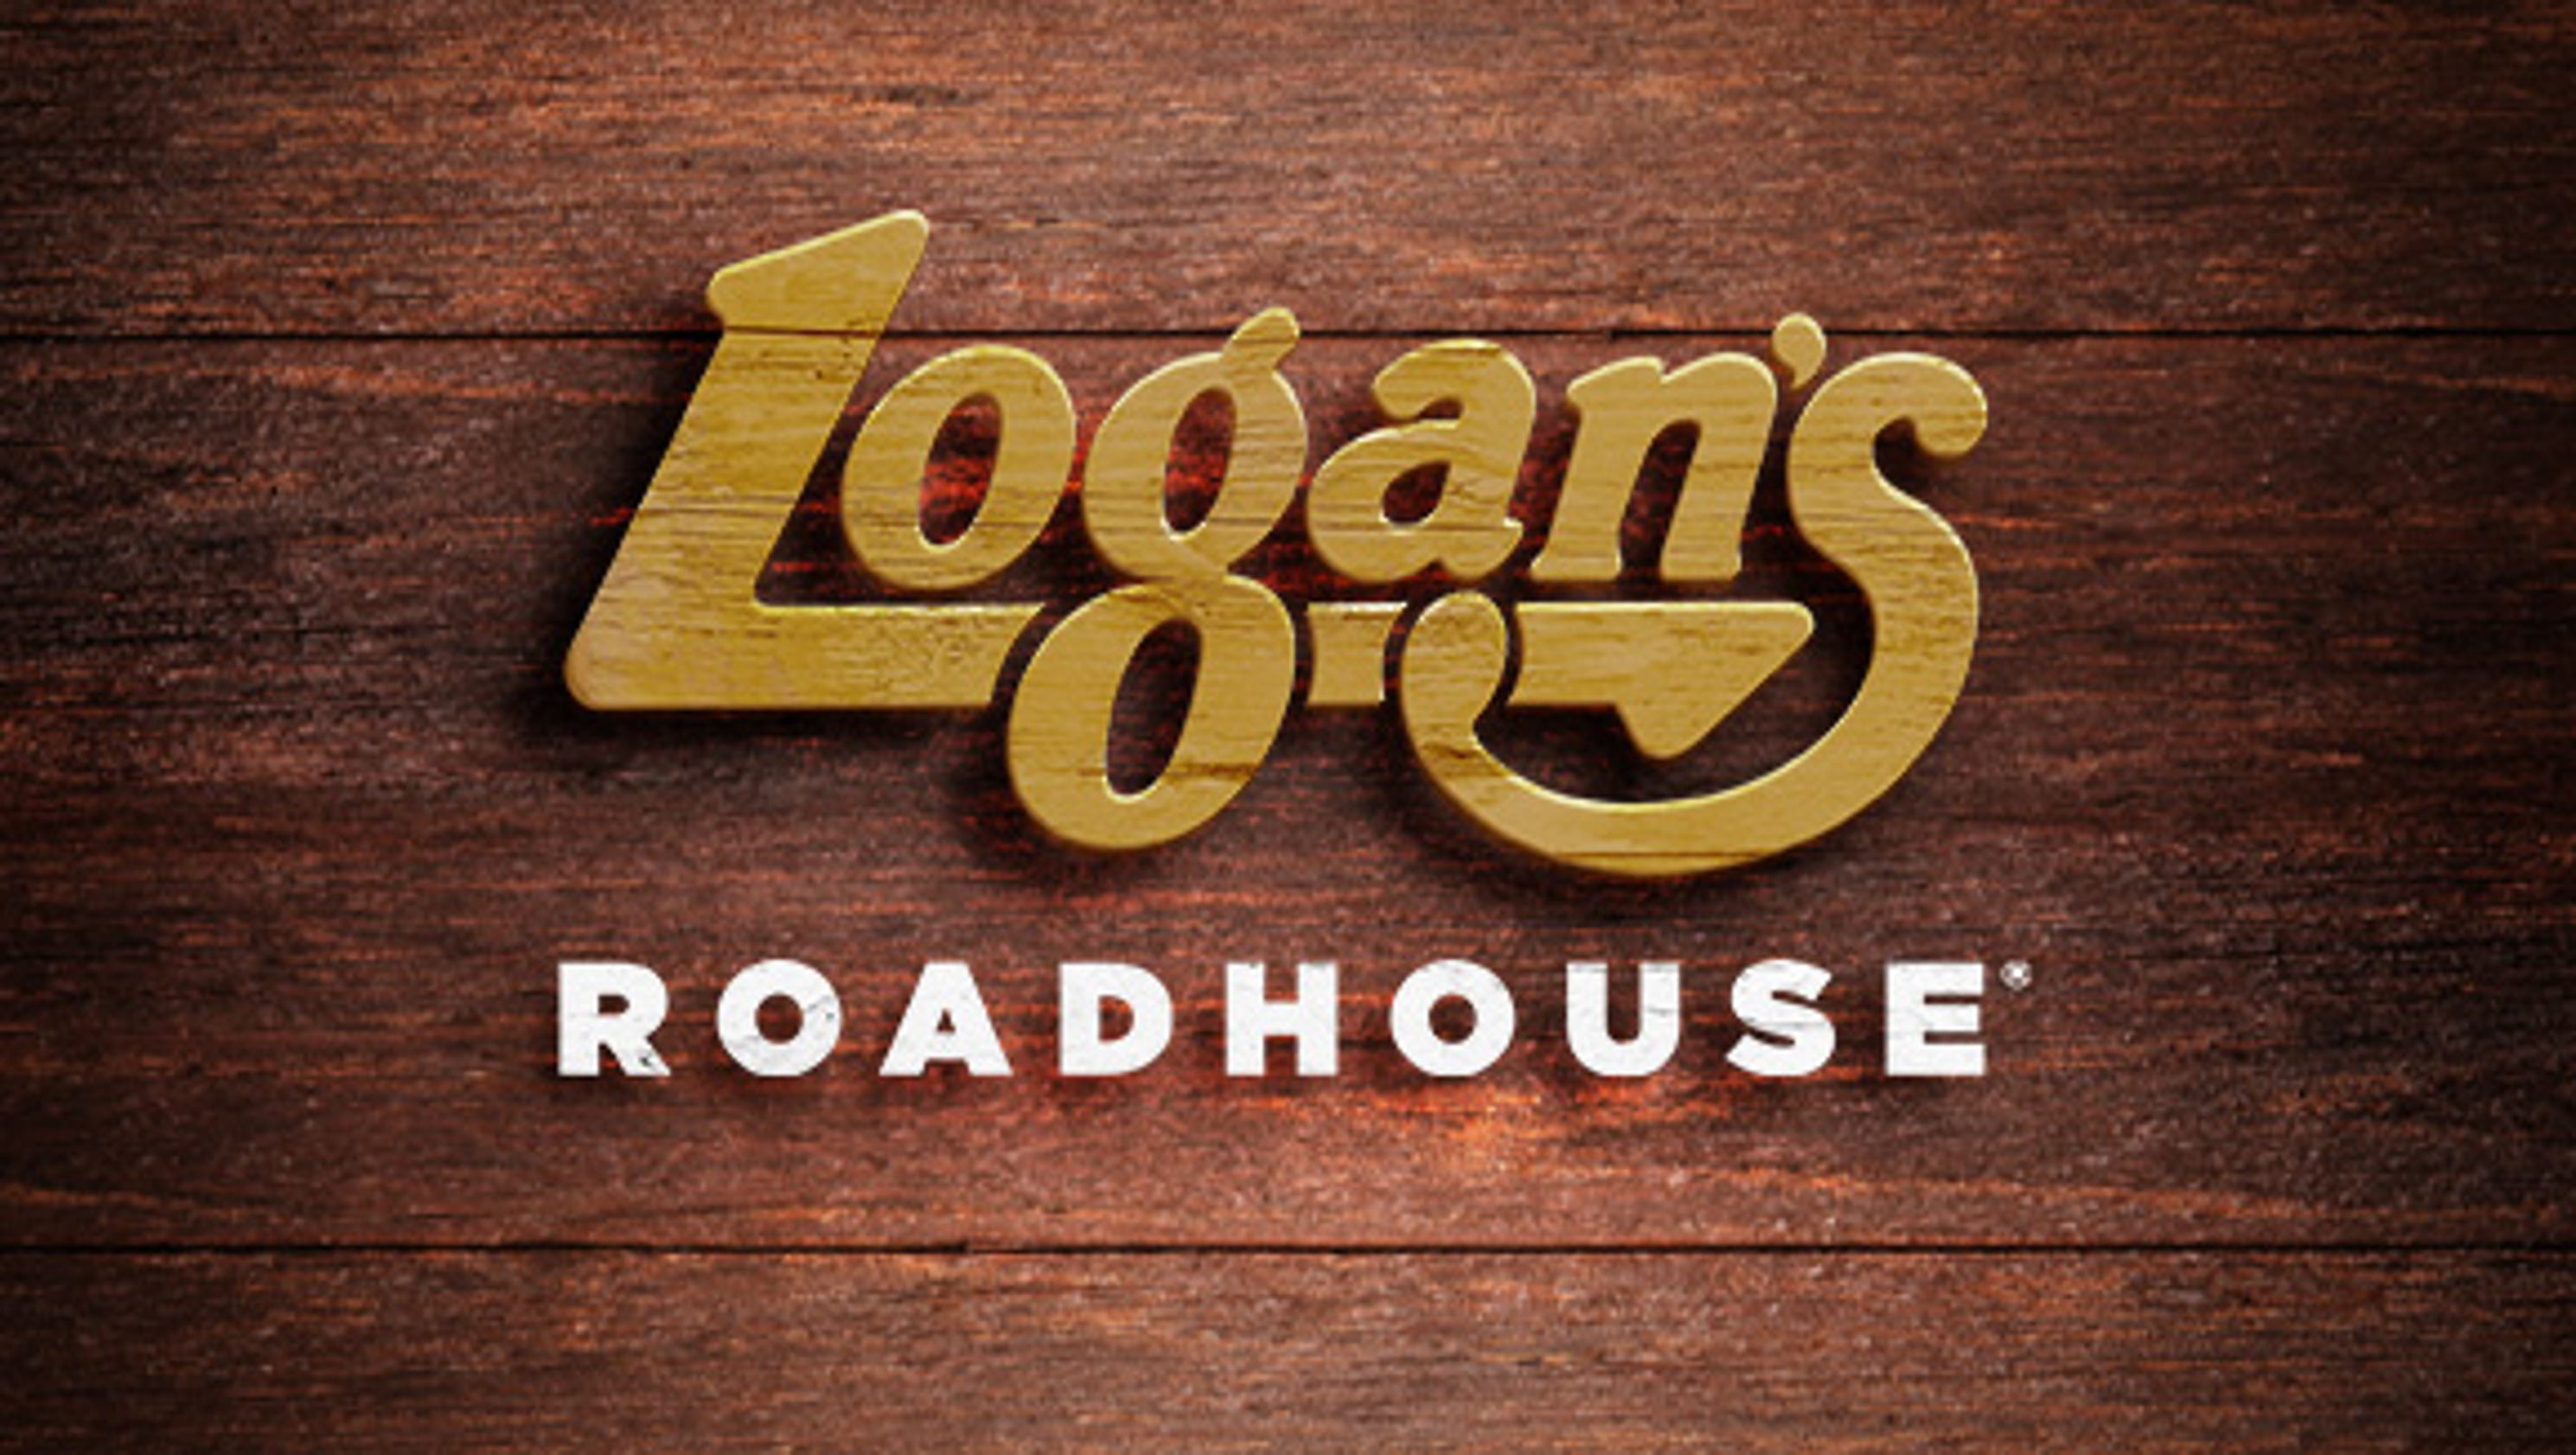 Logan's Roadhouse files for bankruptcy3200 x 1680